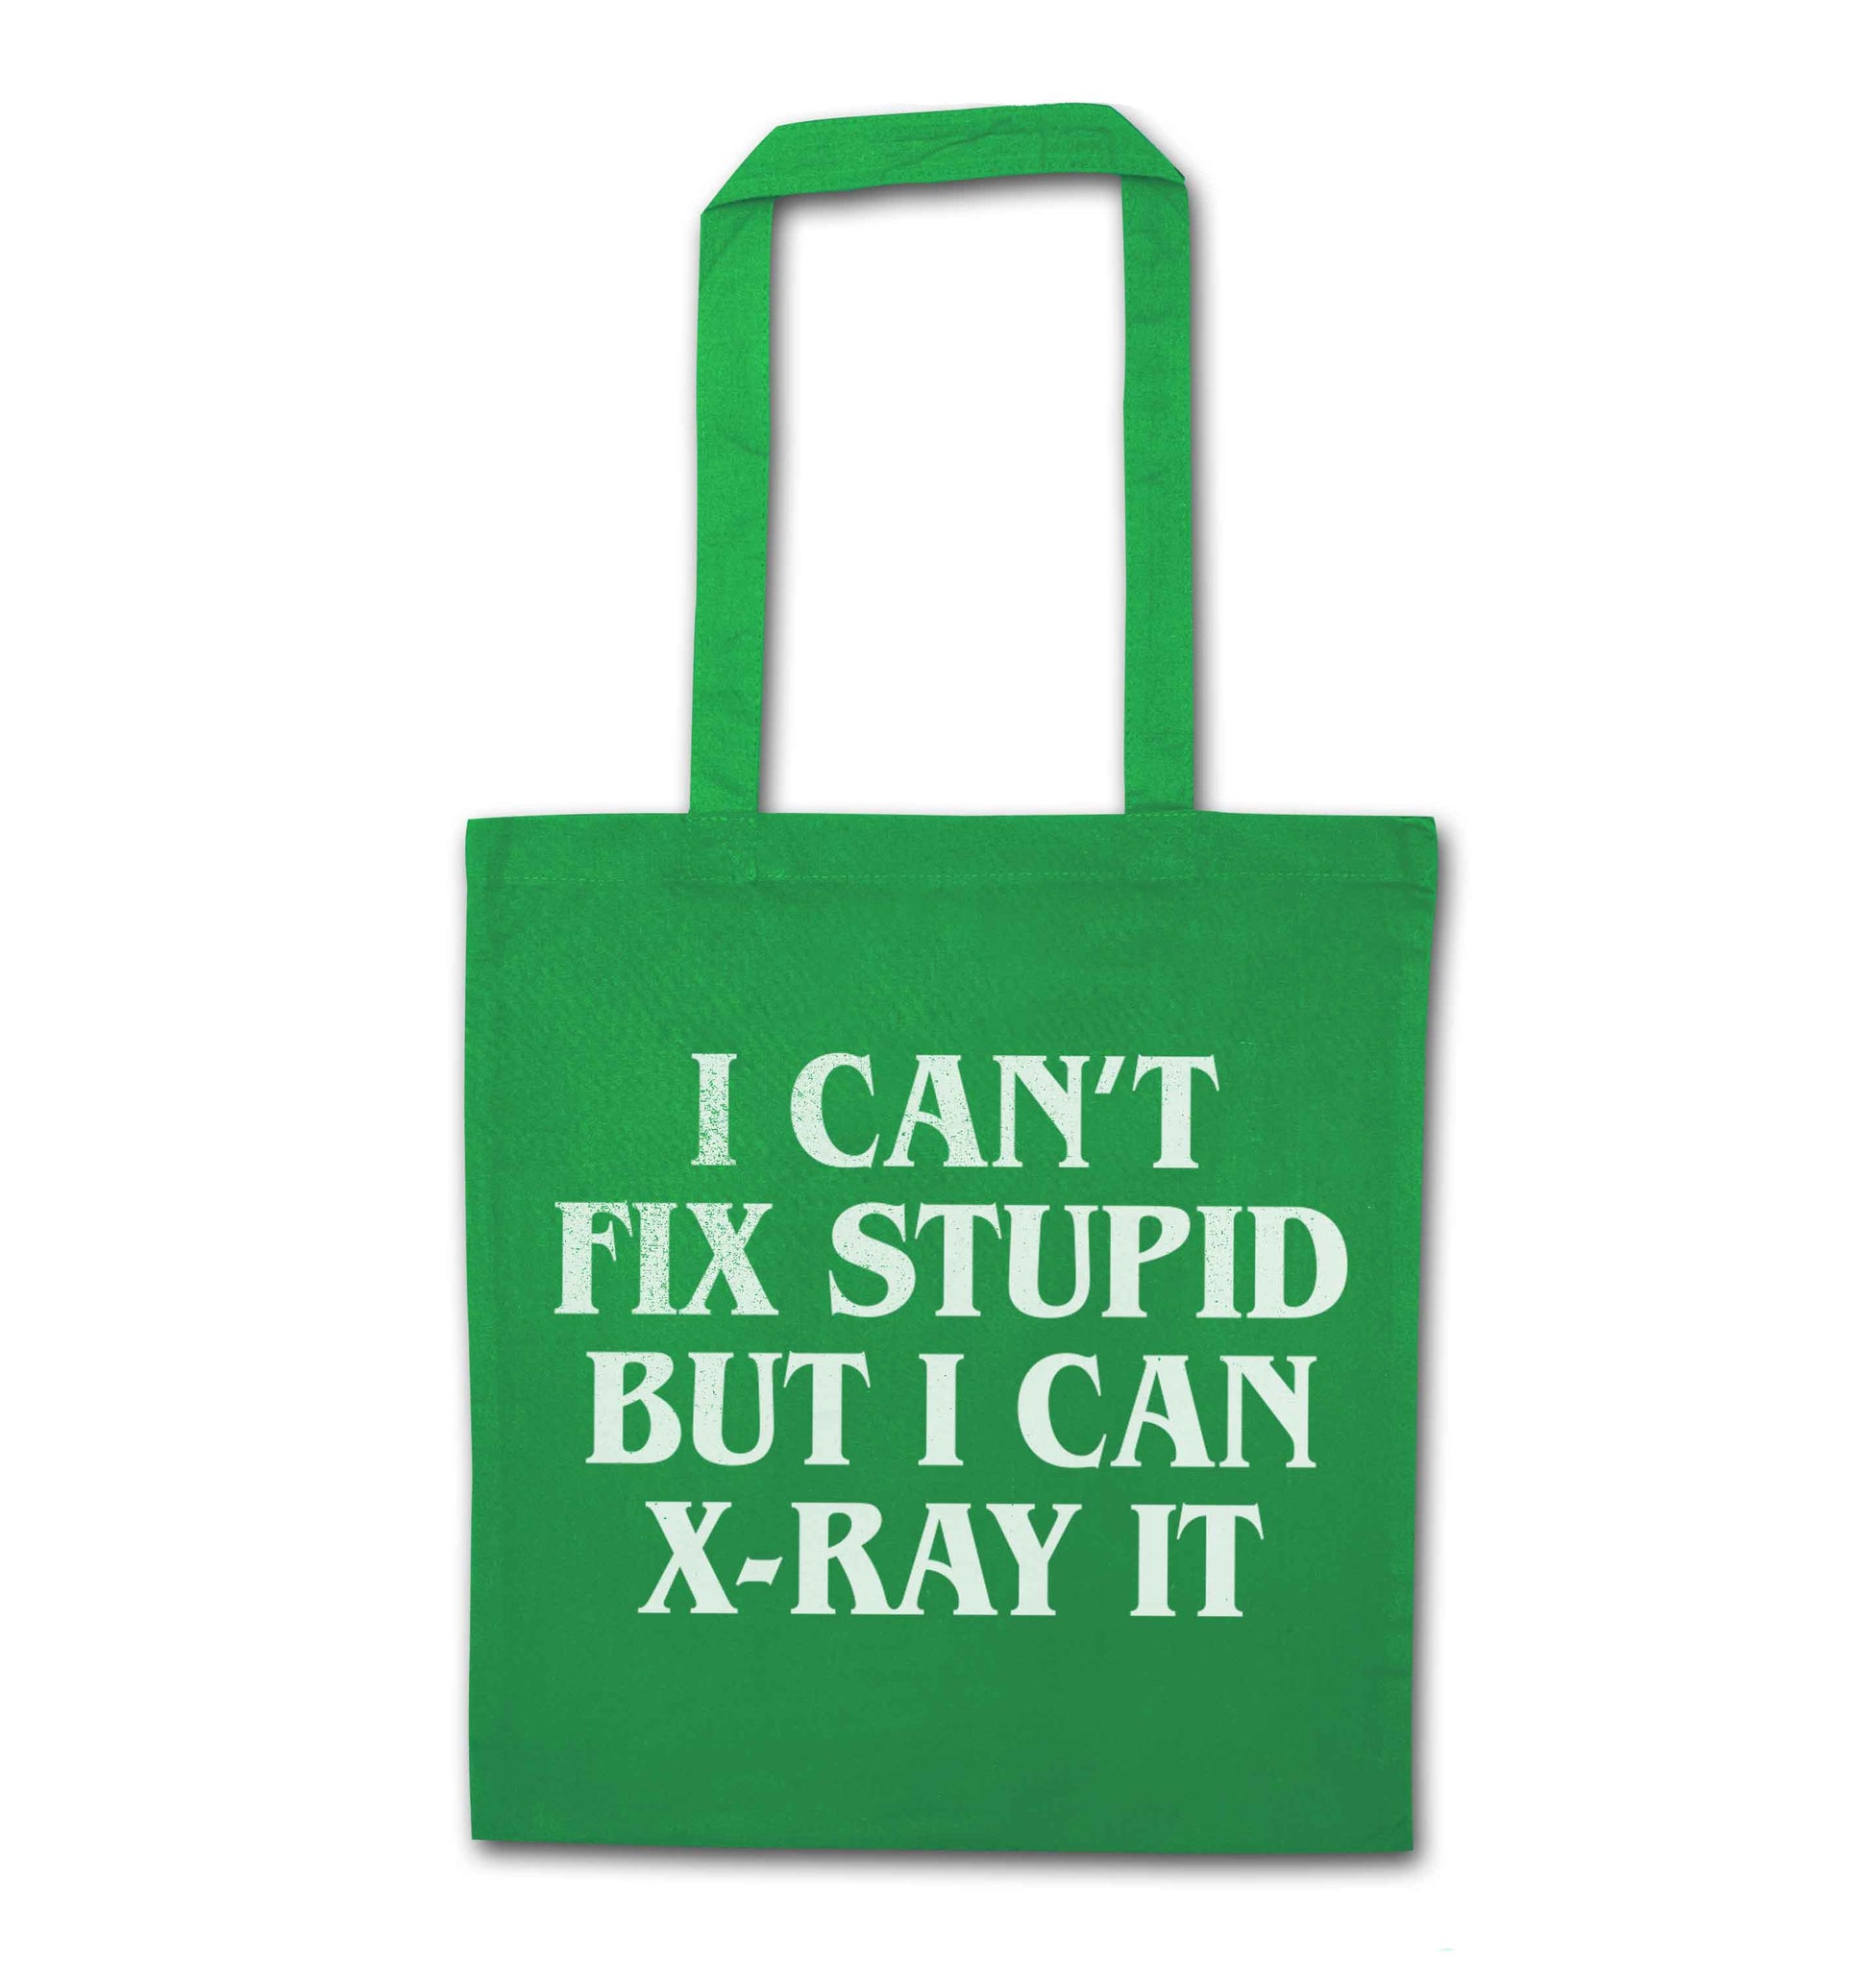 I can't fix stupid but I can X-Ray it green tote bag